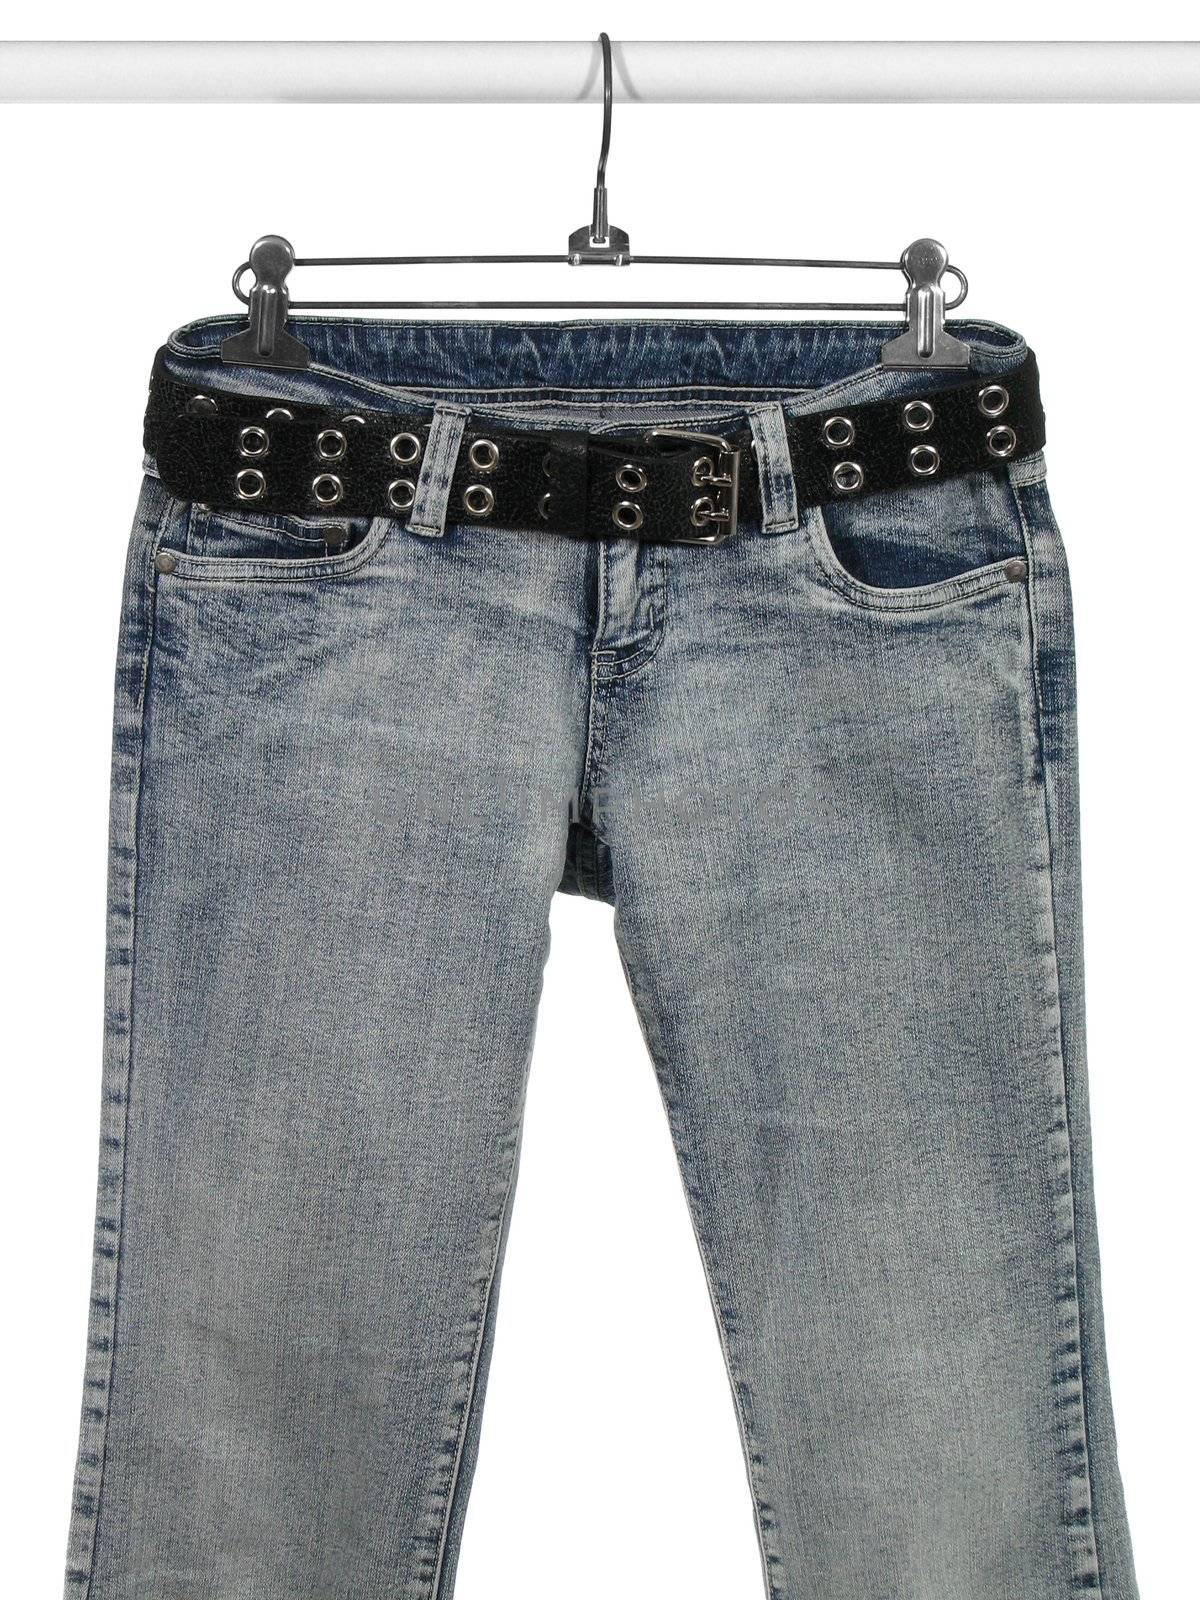 Blue jeans with black leather belt on a rack. Isolated on white.